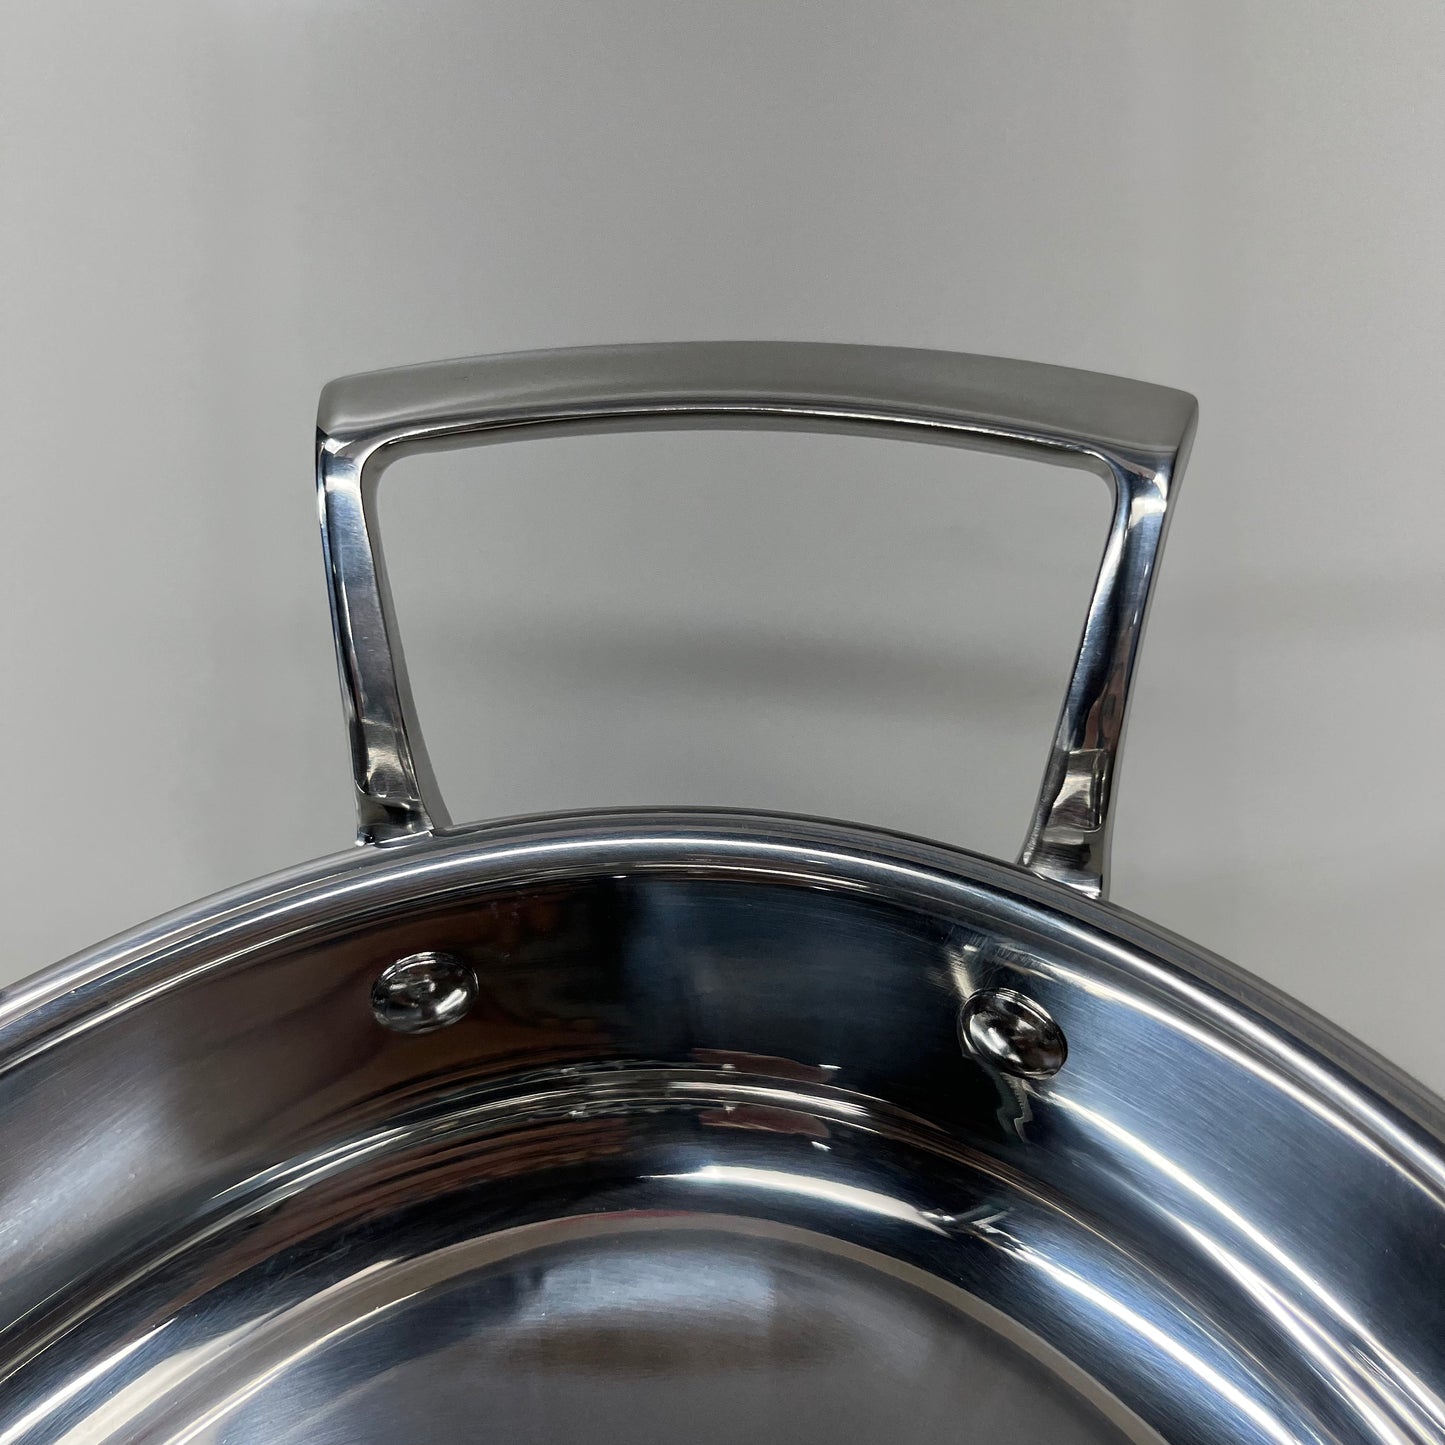 BROWNE Thermalloy Oval Stainless Steel Roast Pan 11" x 8.7" x 2" 5724177 (New)